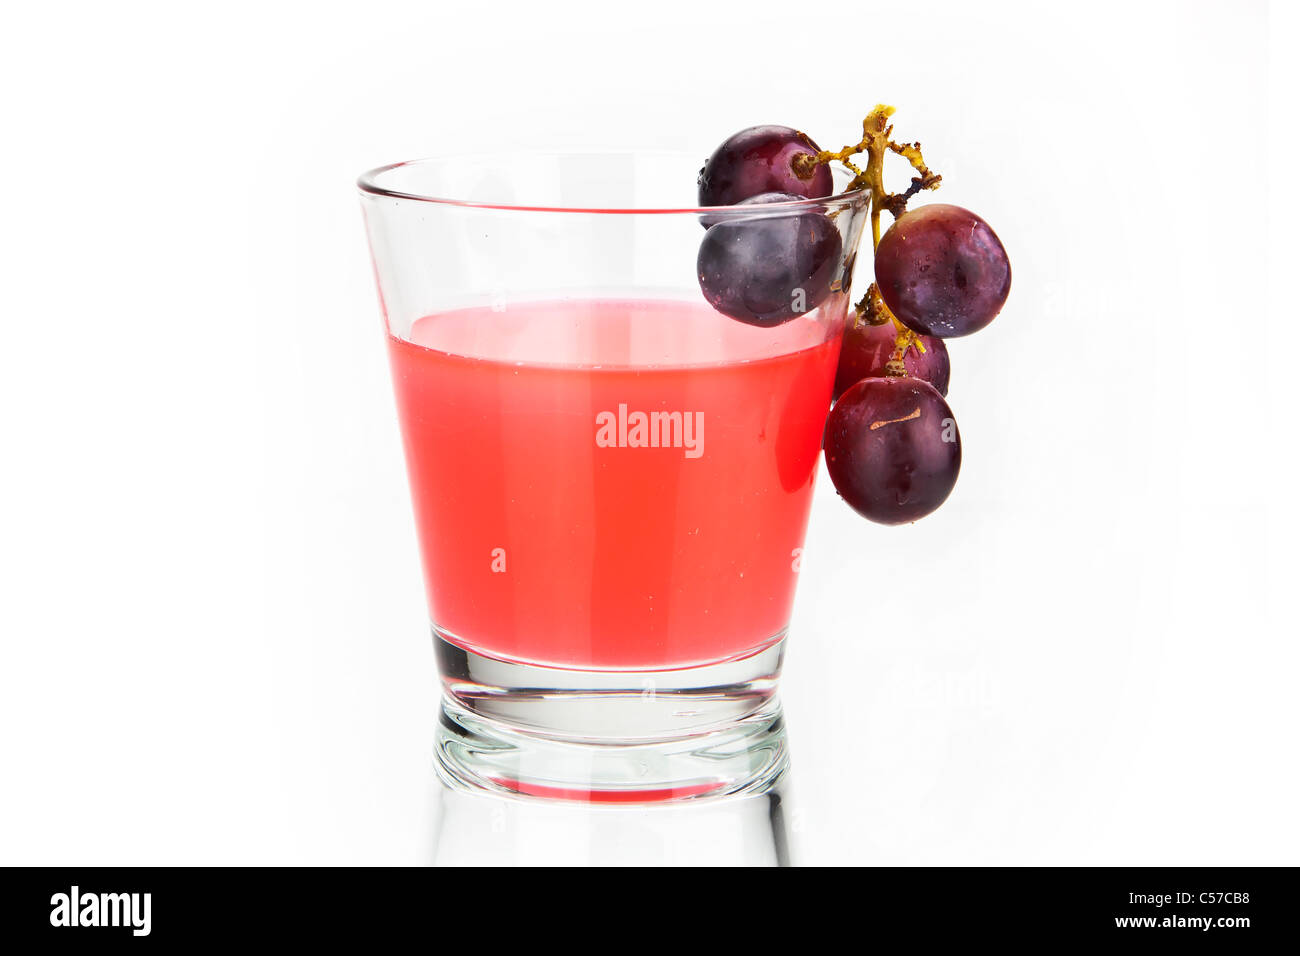 a glass of grape juice and grapes Stock Photo